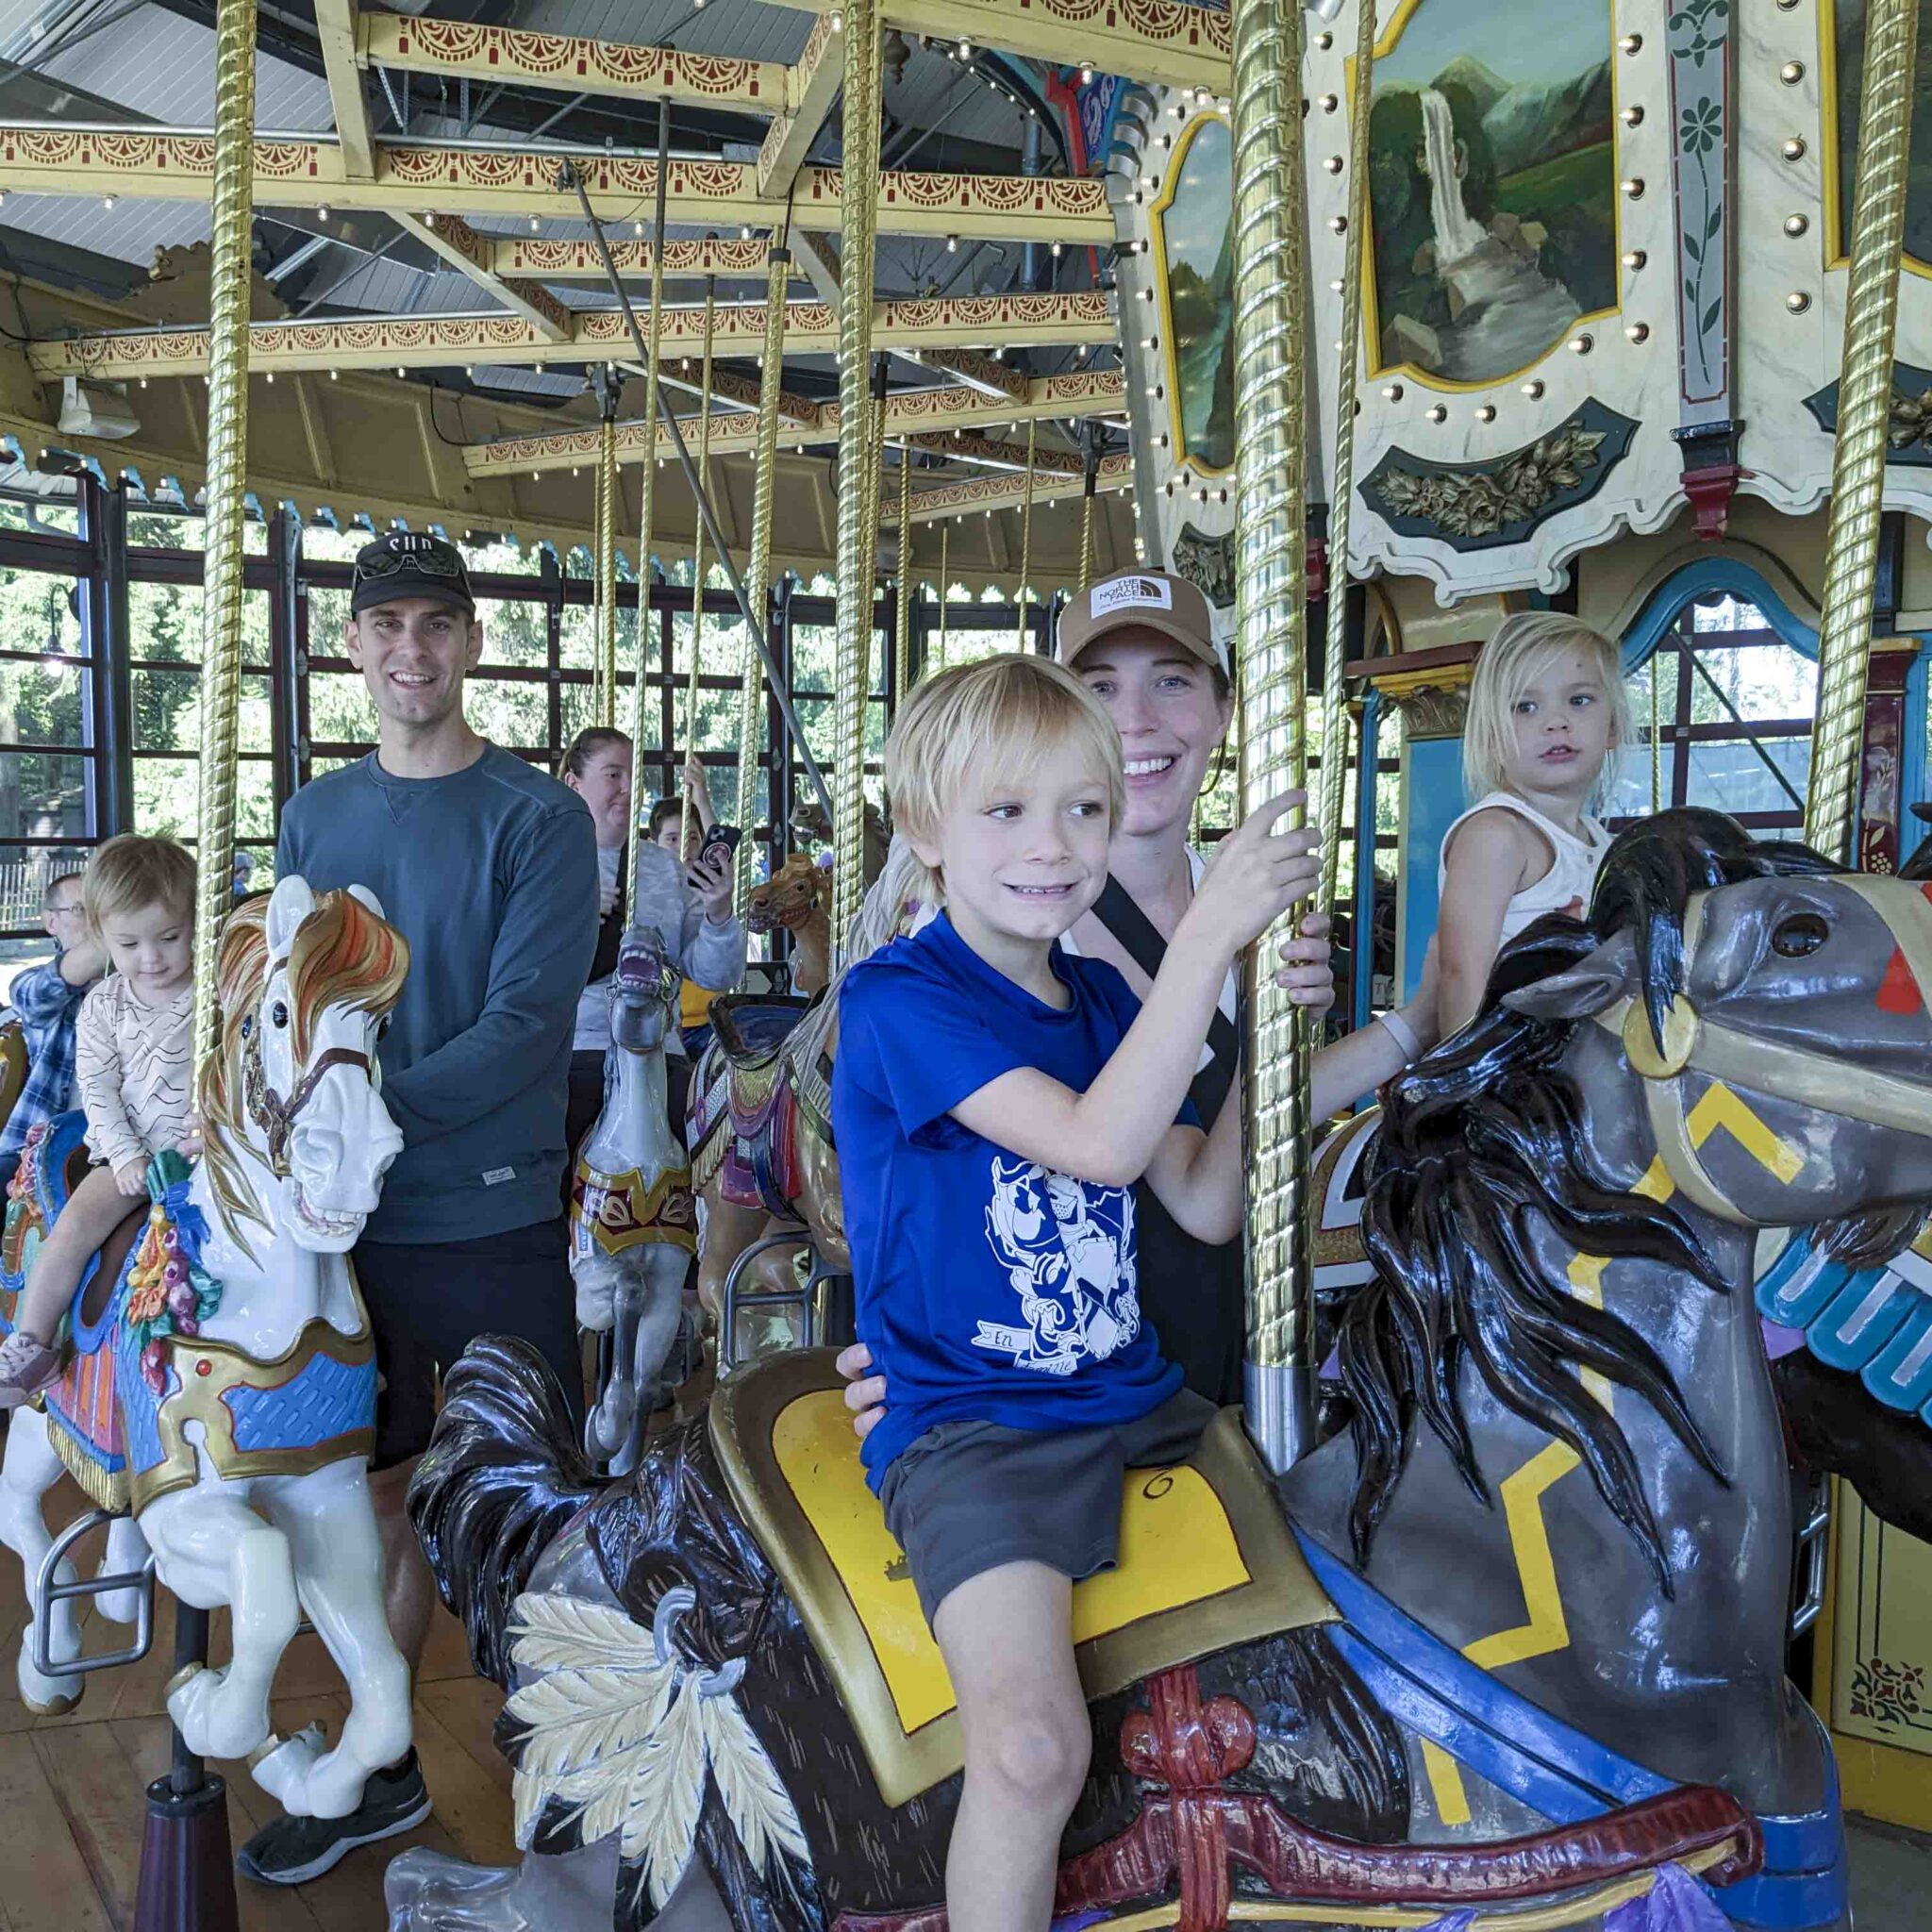 A family rides on the carousel